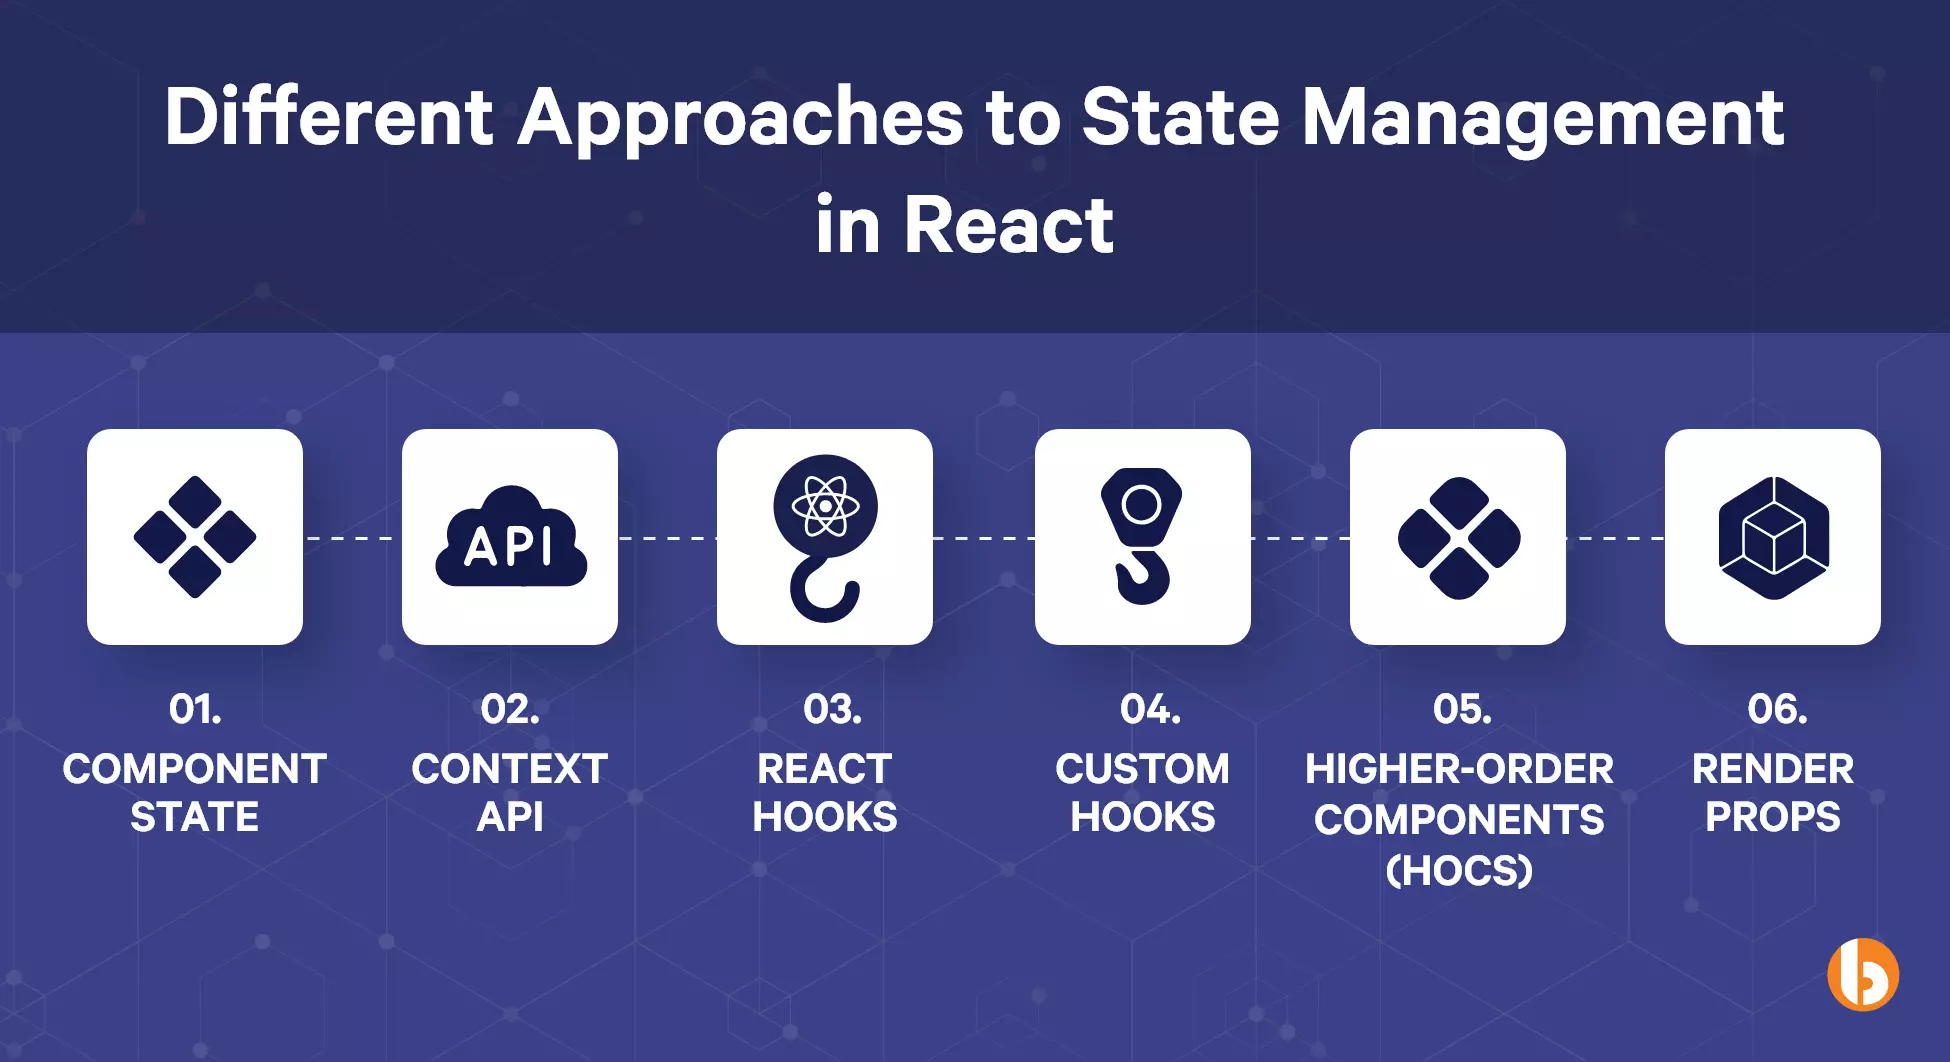 Approaches to State Management in React